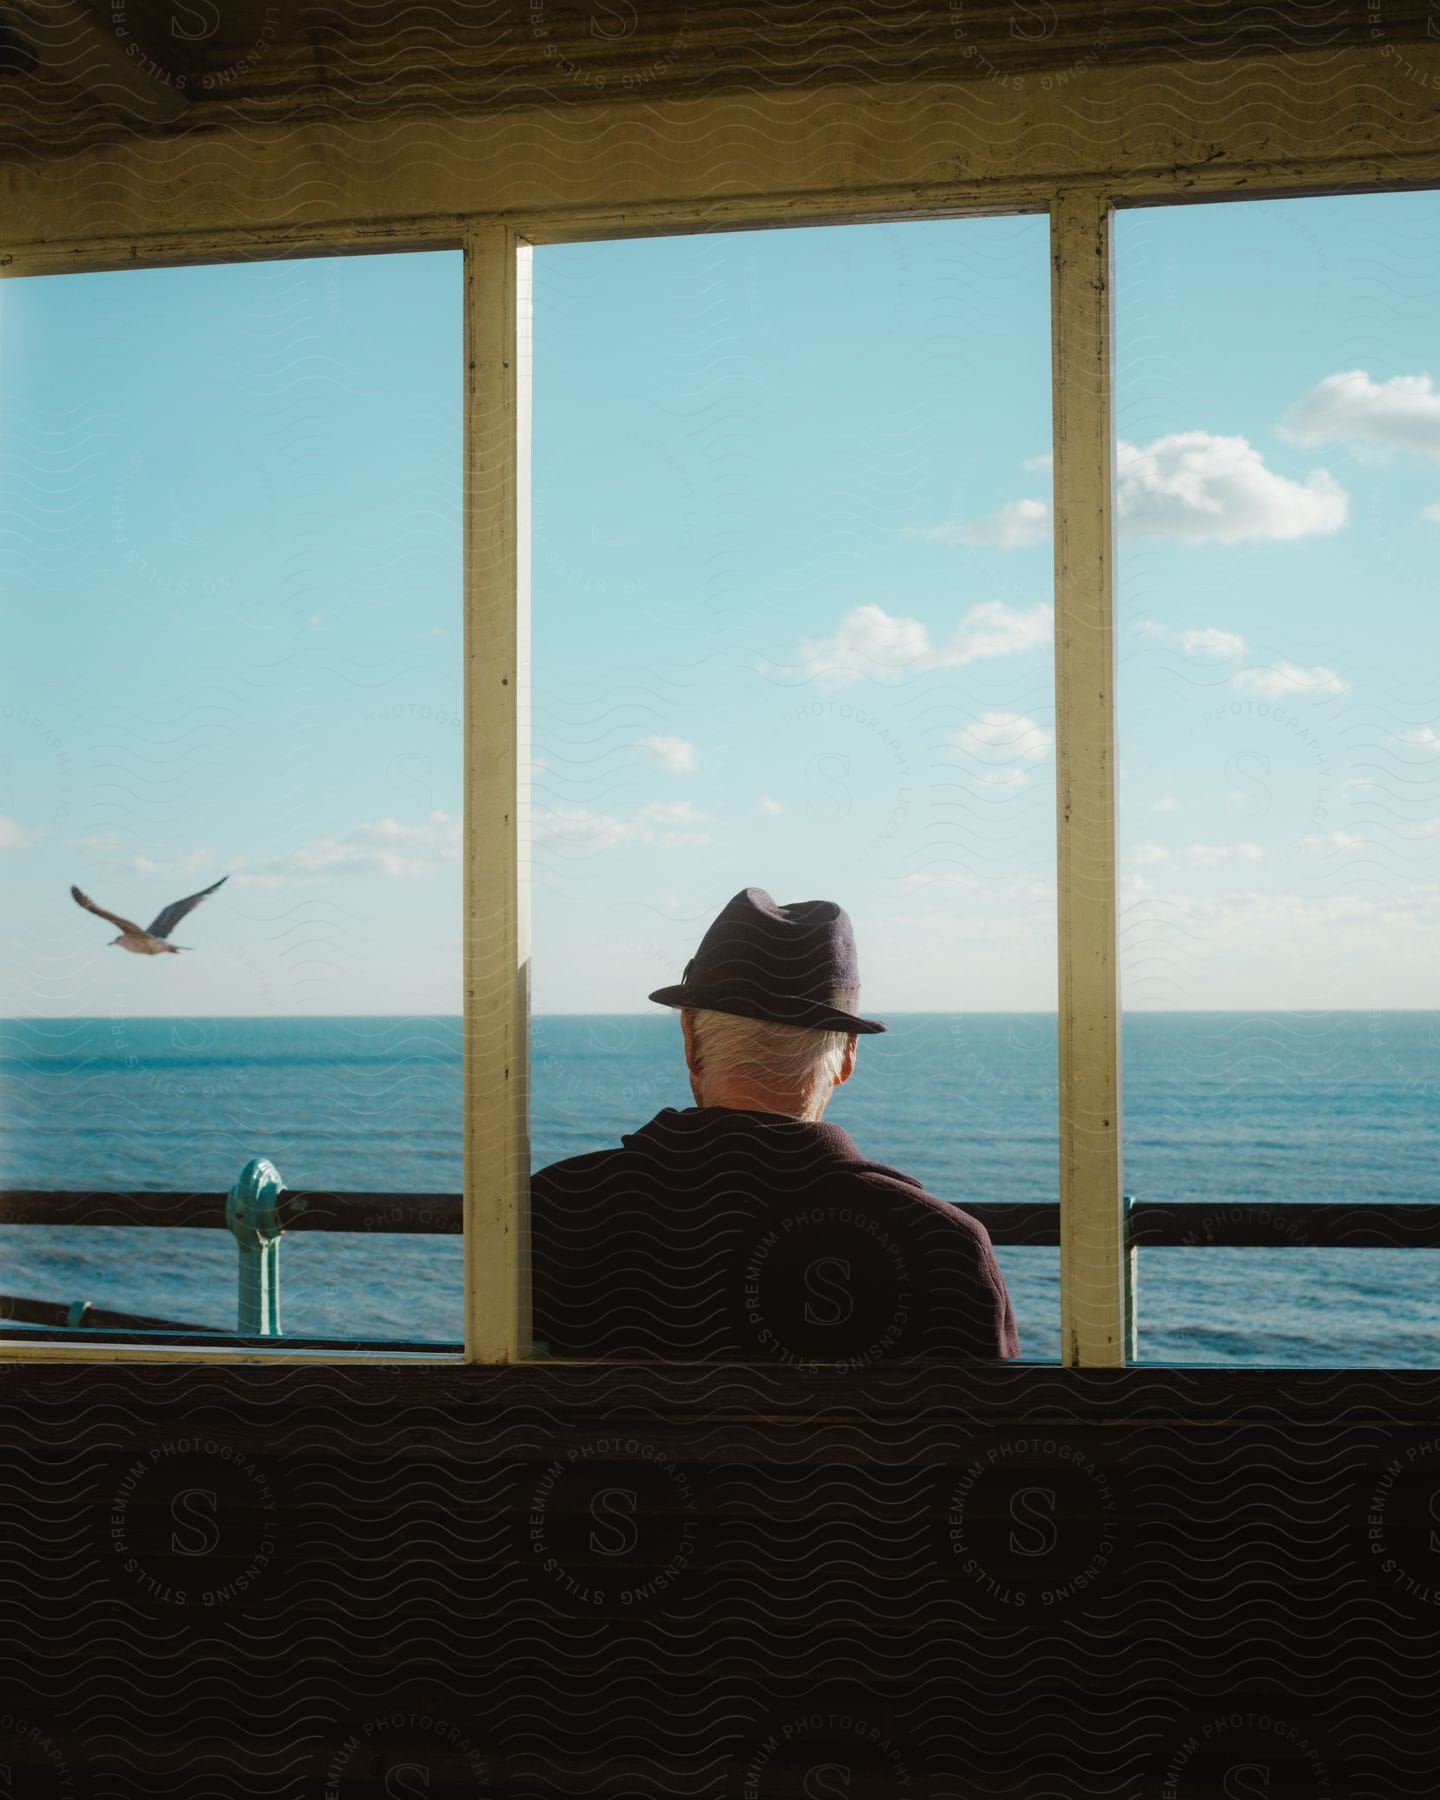 Gentleman in a hat with his back sitting on a tourist boat with a view of the sea and a bird flying.